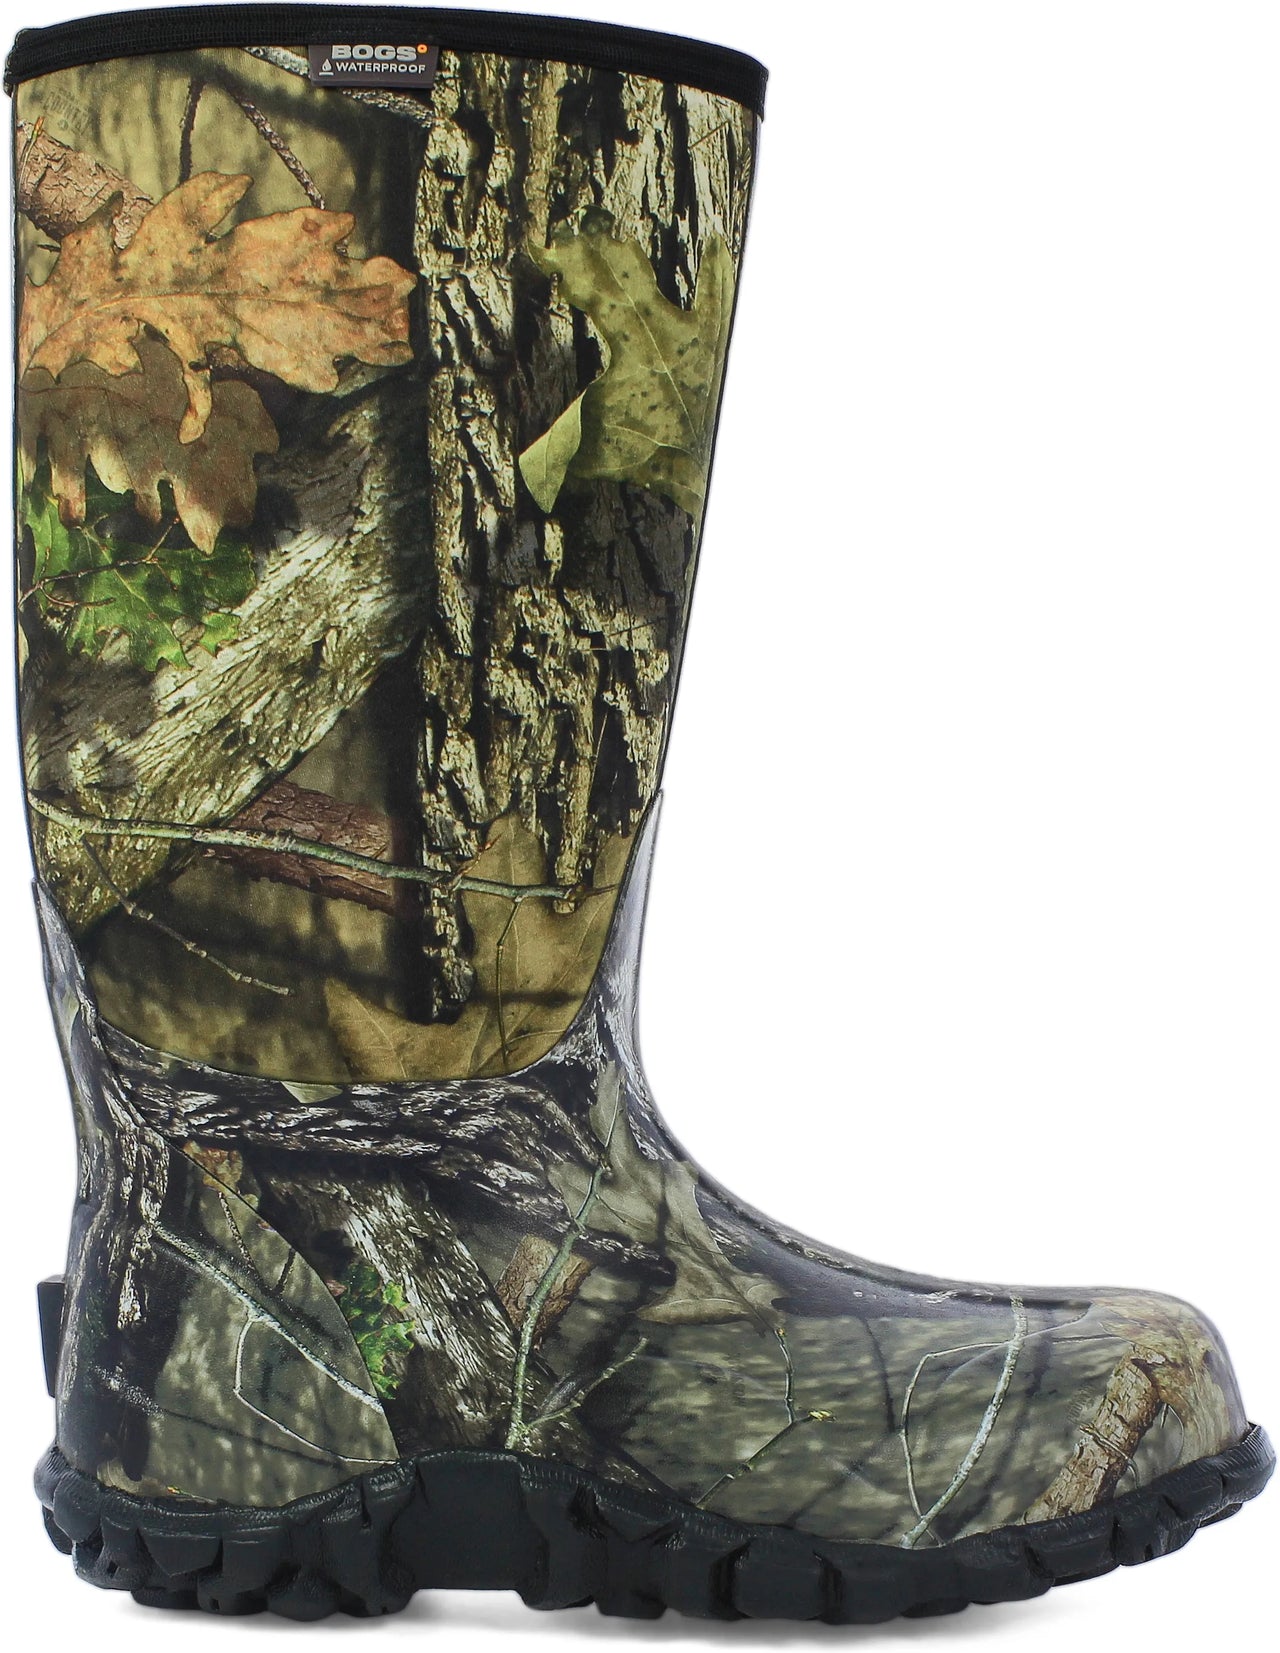 Classic Men’s Rubber Hunting Boots